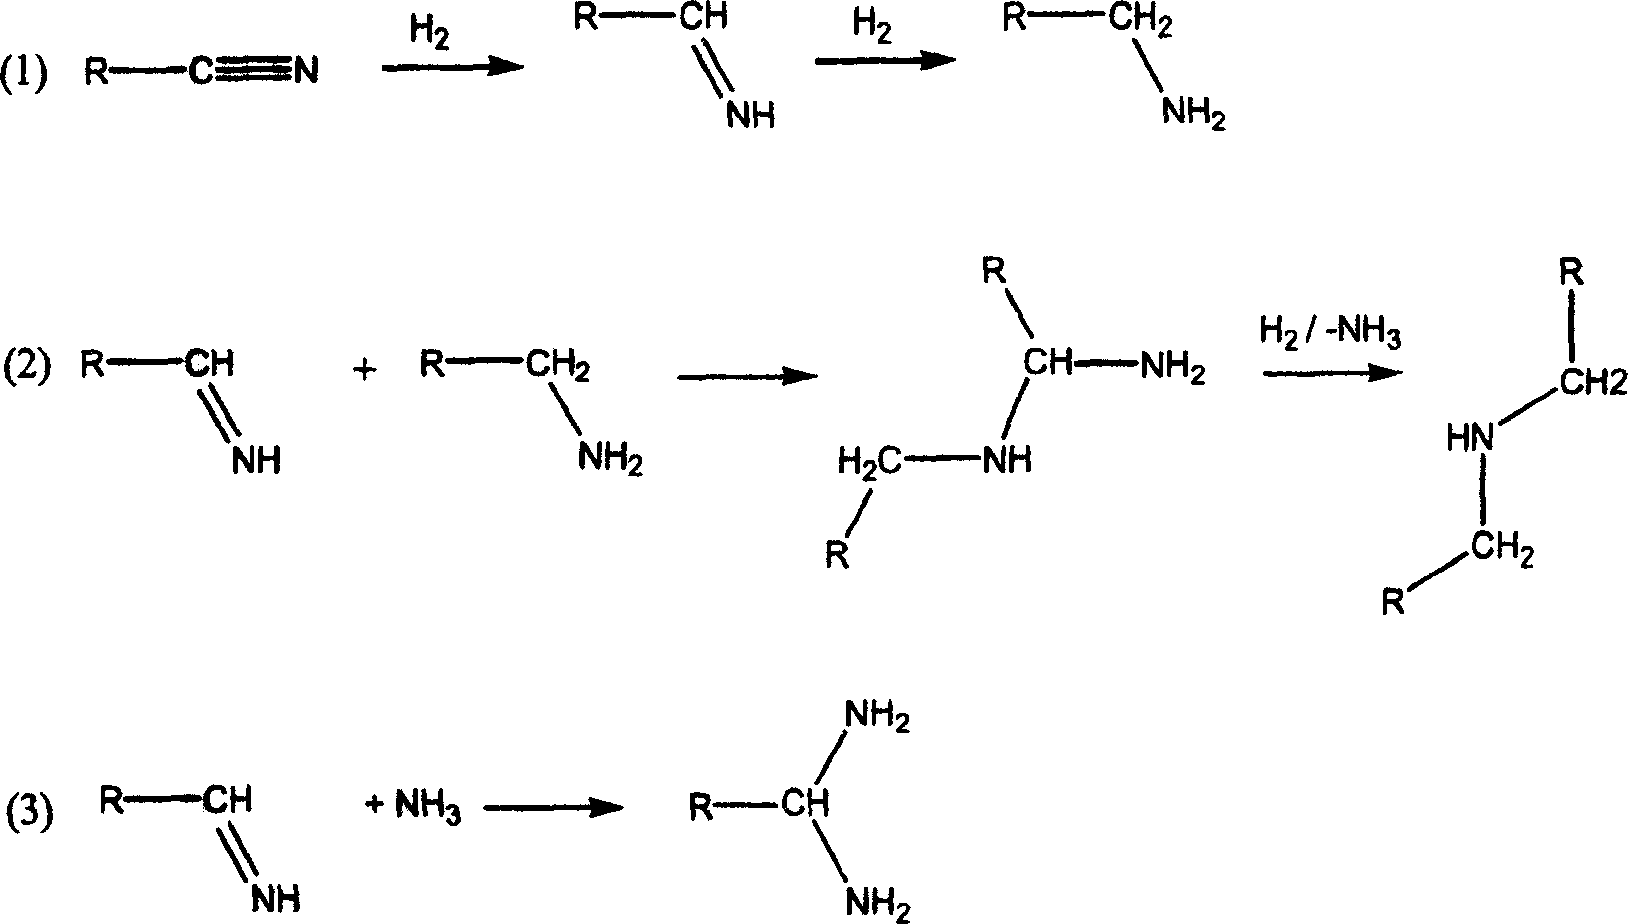 Process for preparing amines by conditioning the catalyst with ammonia